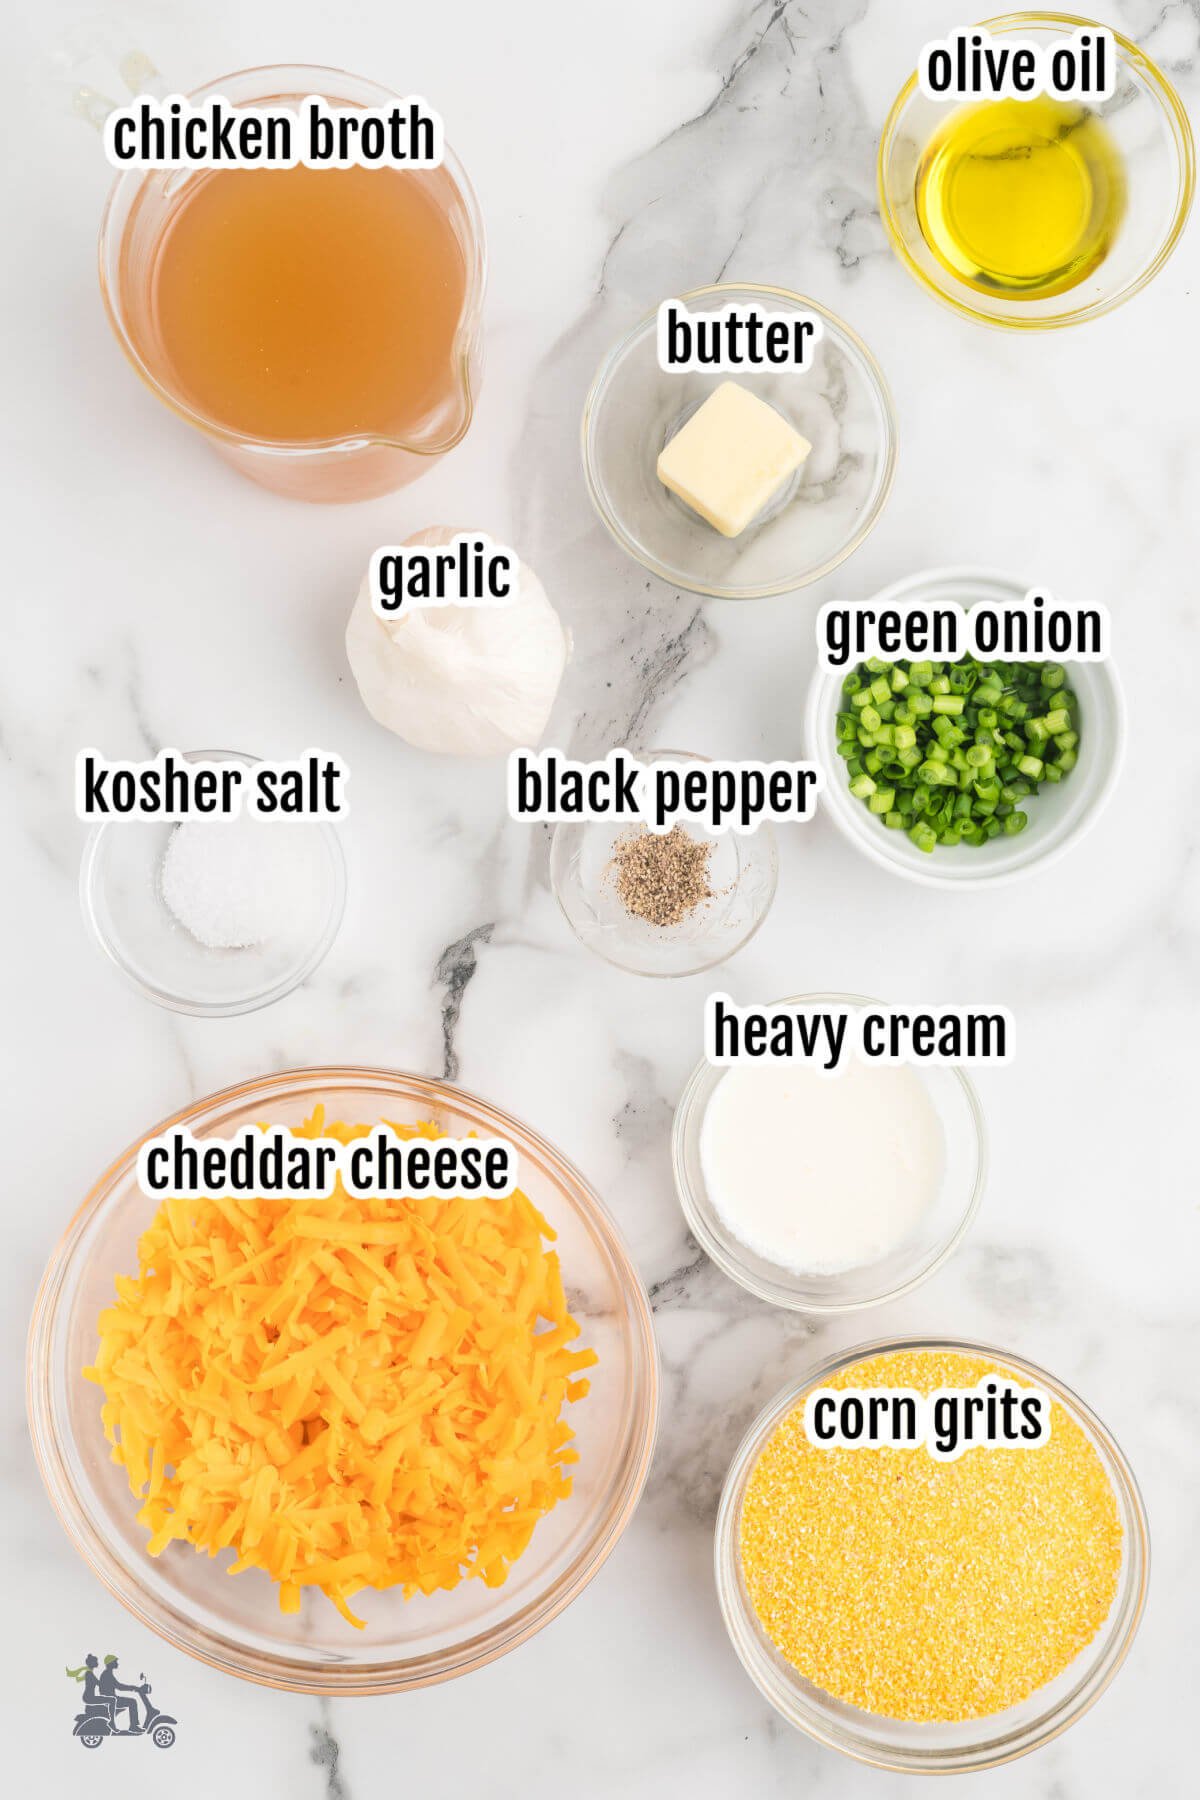 Image of the ingredients needed to make the yellow corn grits. 